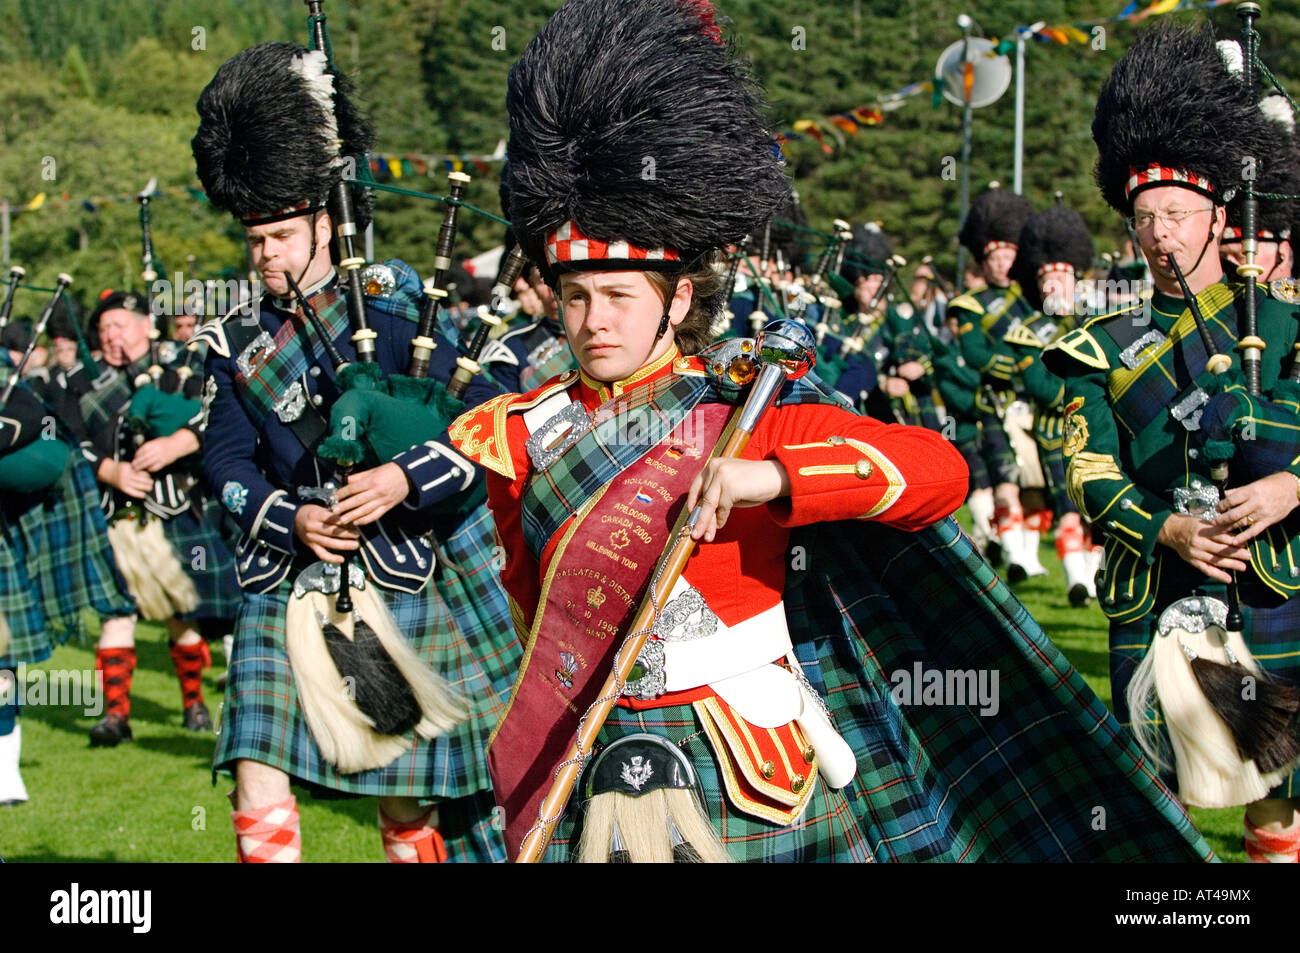 Scottish traditional pipe band majorette leads bagpipe band at the Lonach Highland Games at Strathdon, near Balmoral, Scotland Stock Photo